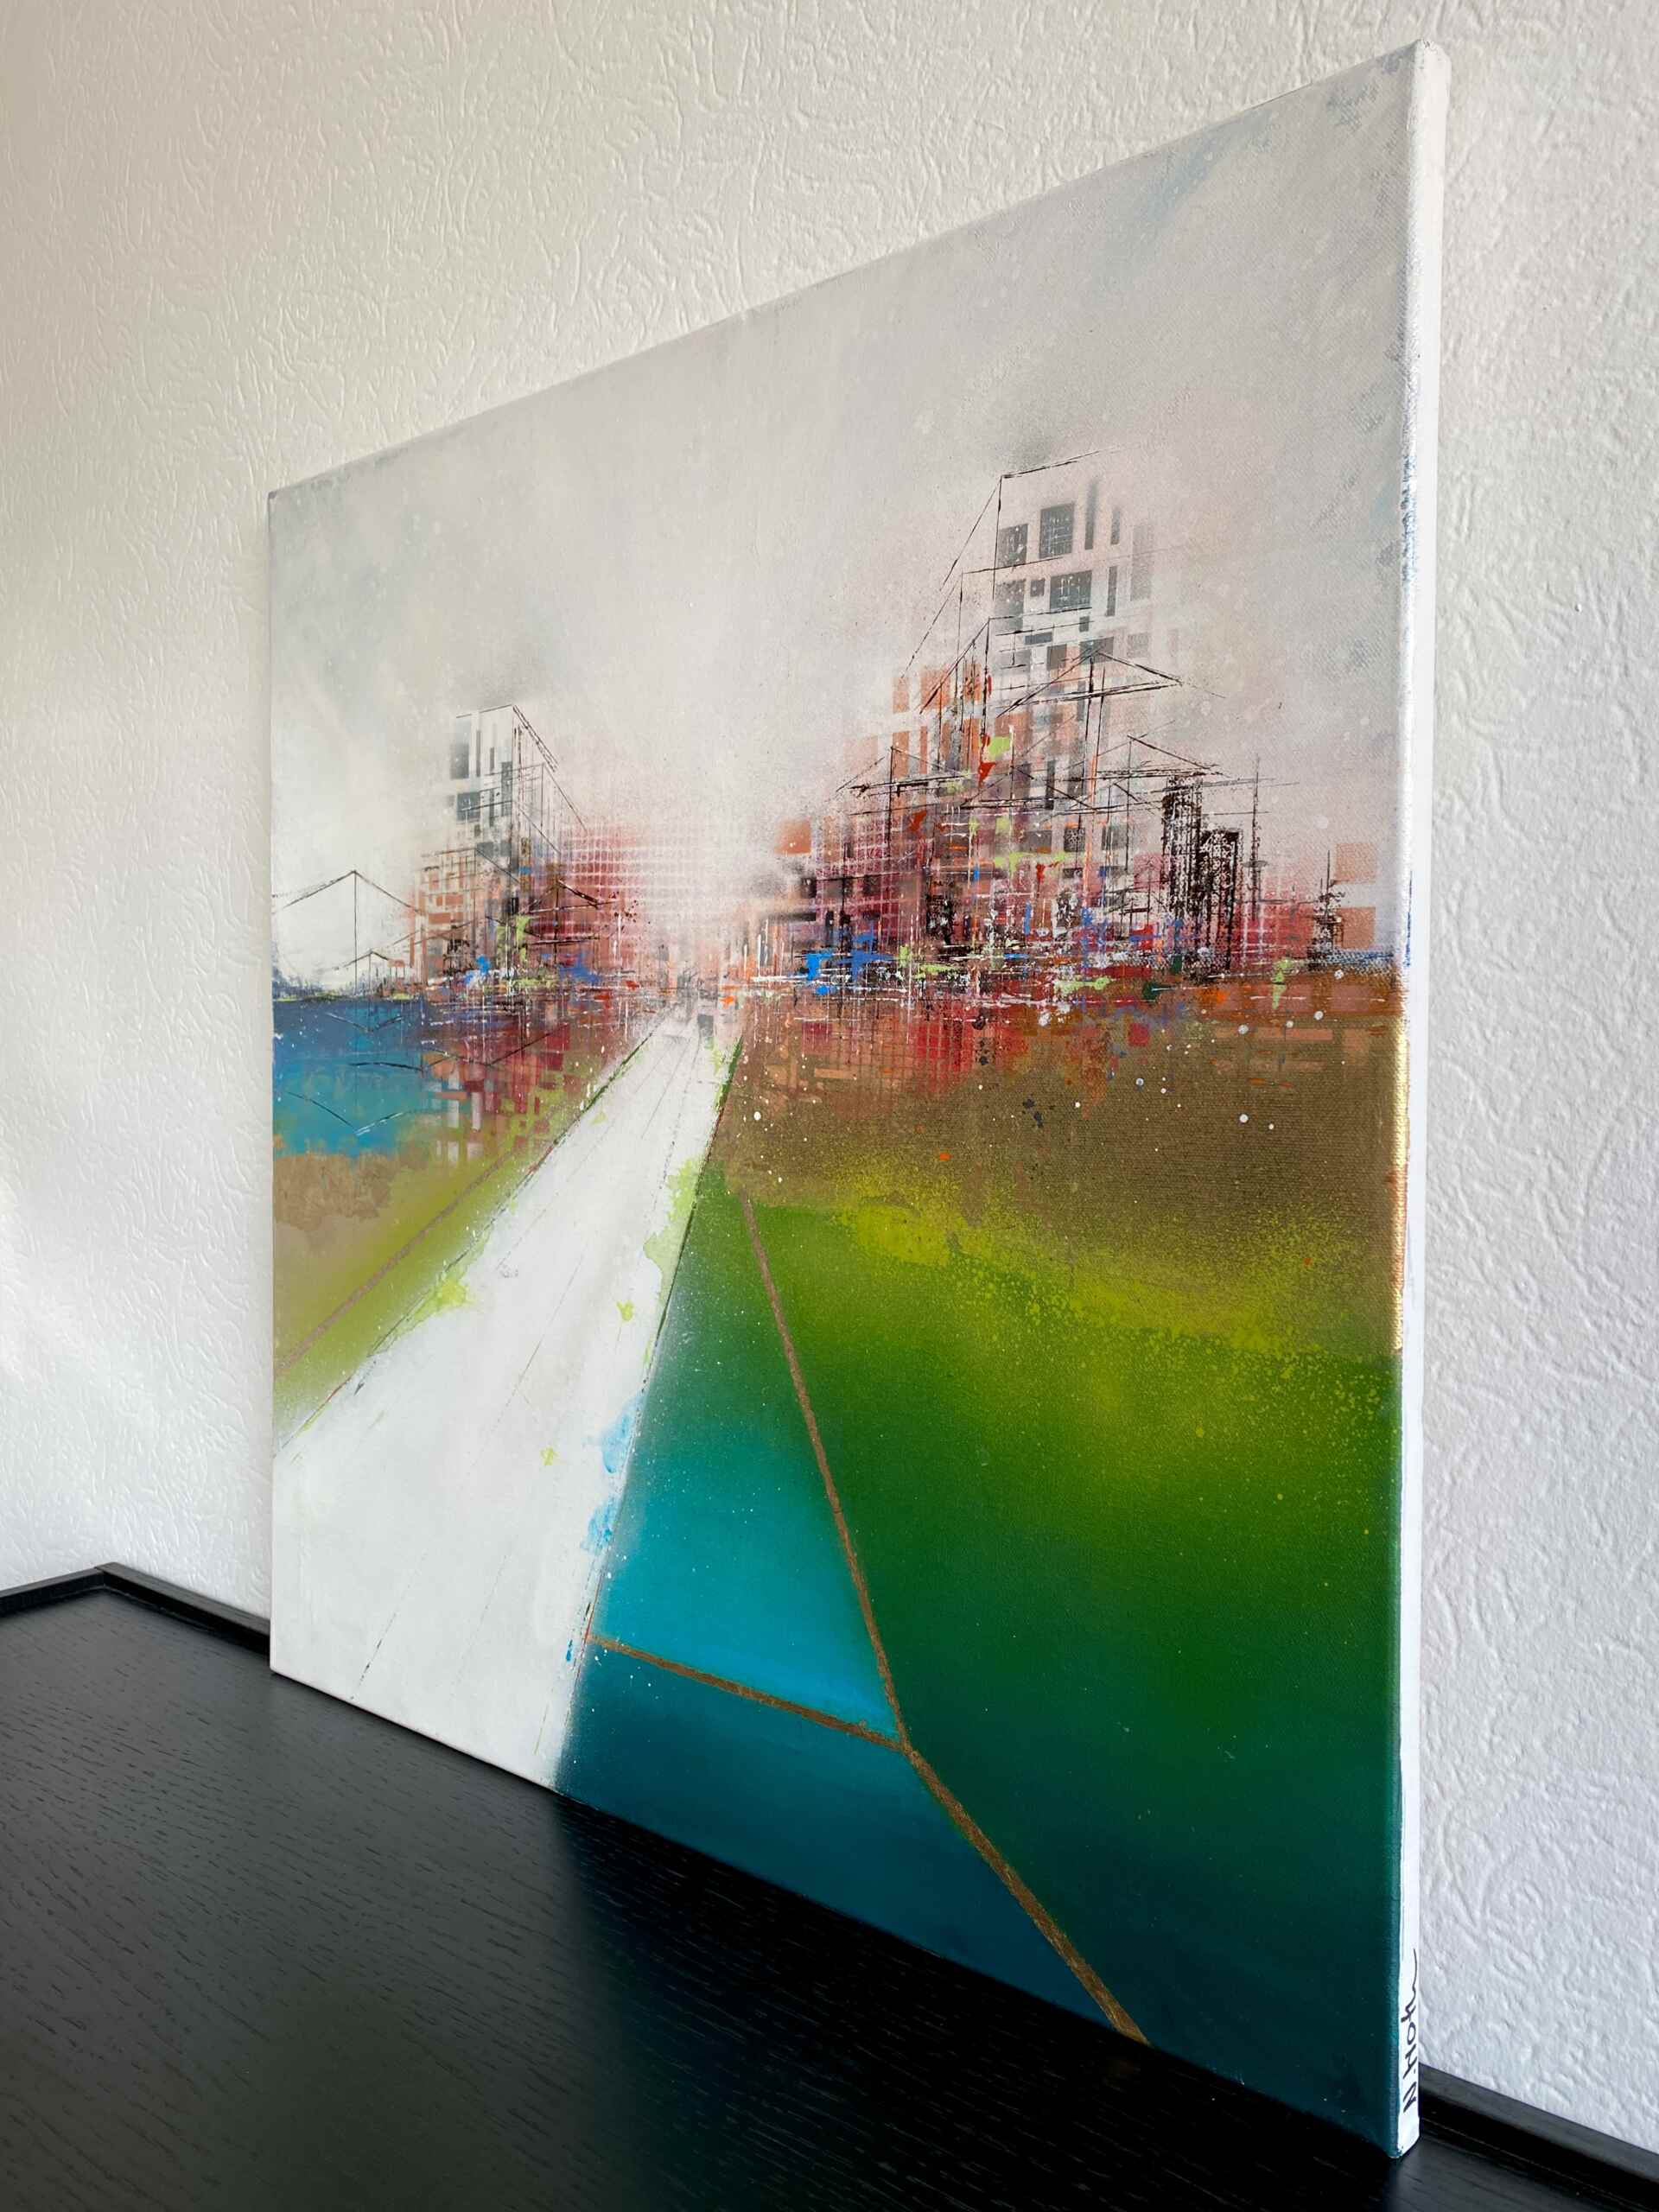 Side view of artwork "City Calling No 1" by Nina Groth